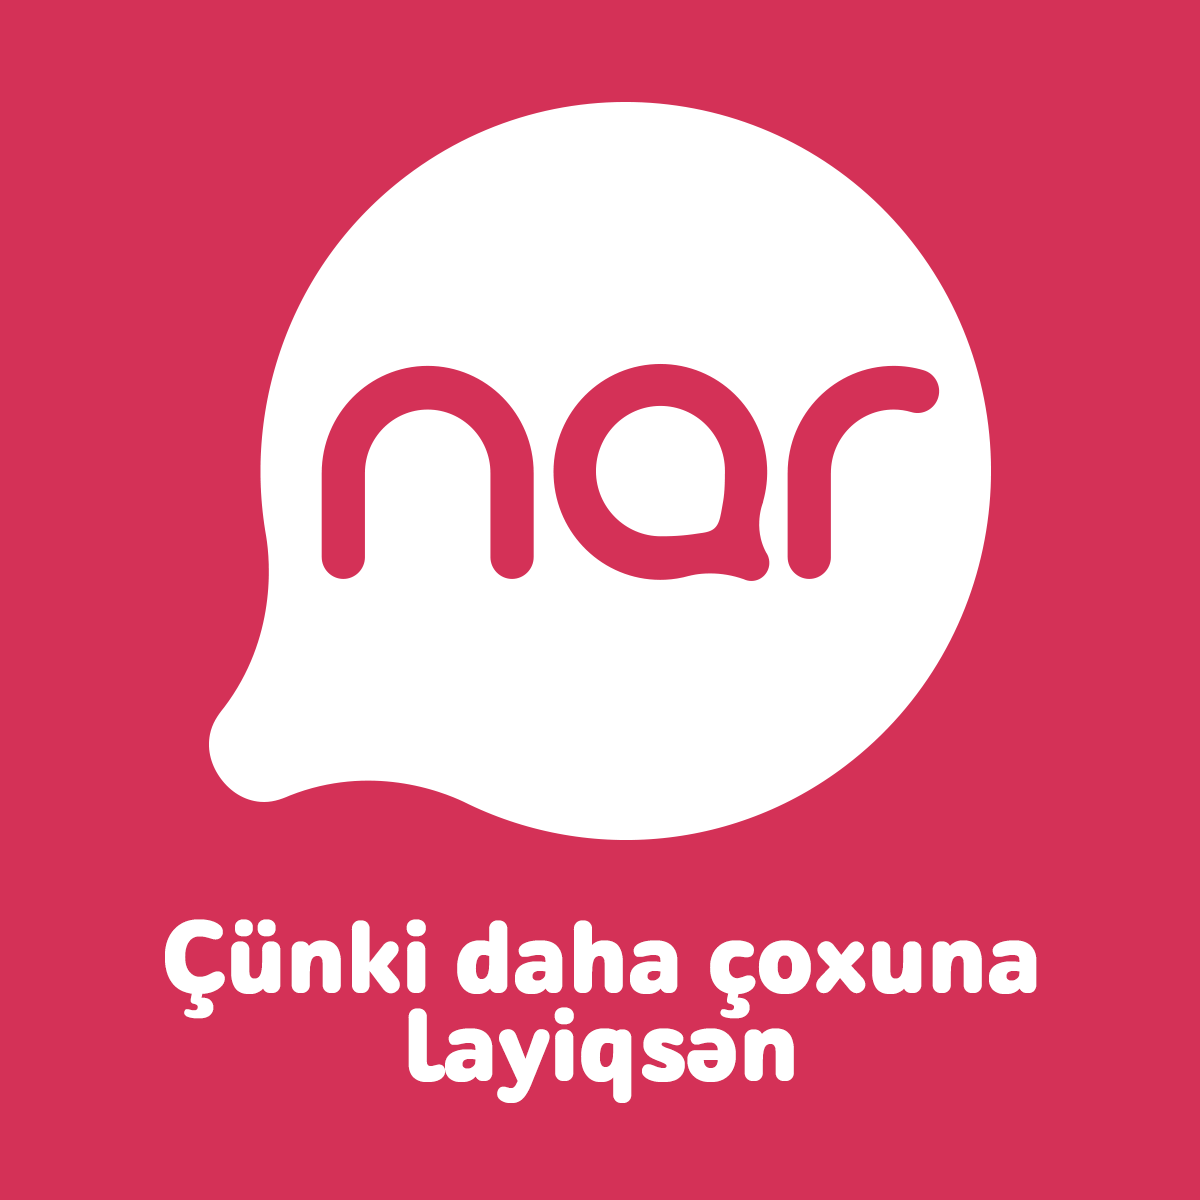 Nar annuls monthly service fee for  ‘Citizen’ type of ASAN İMZA